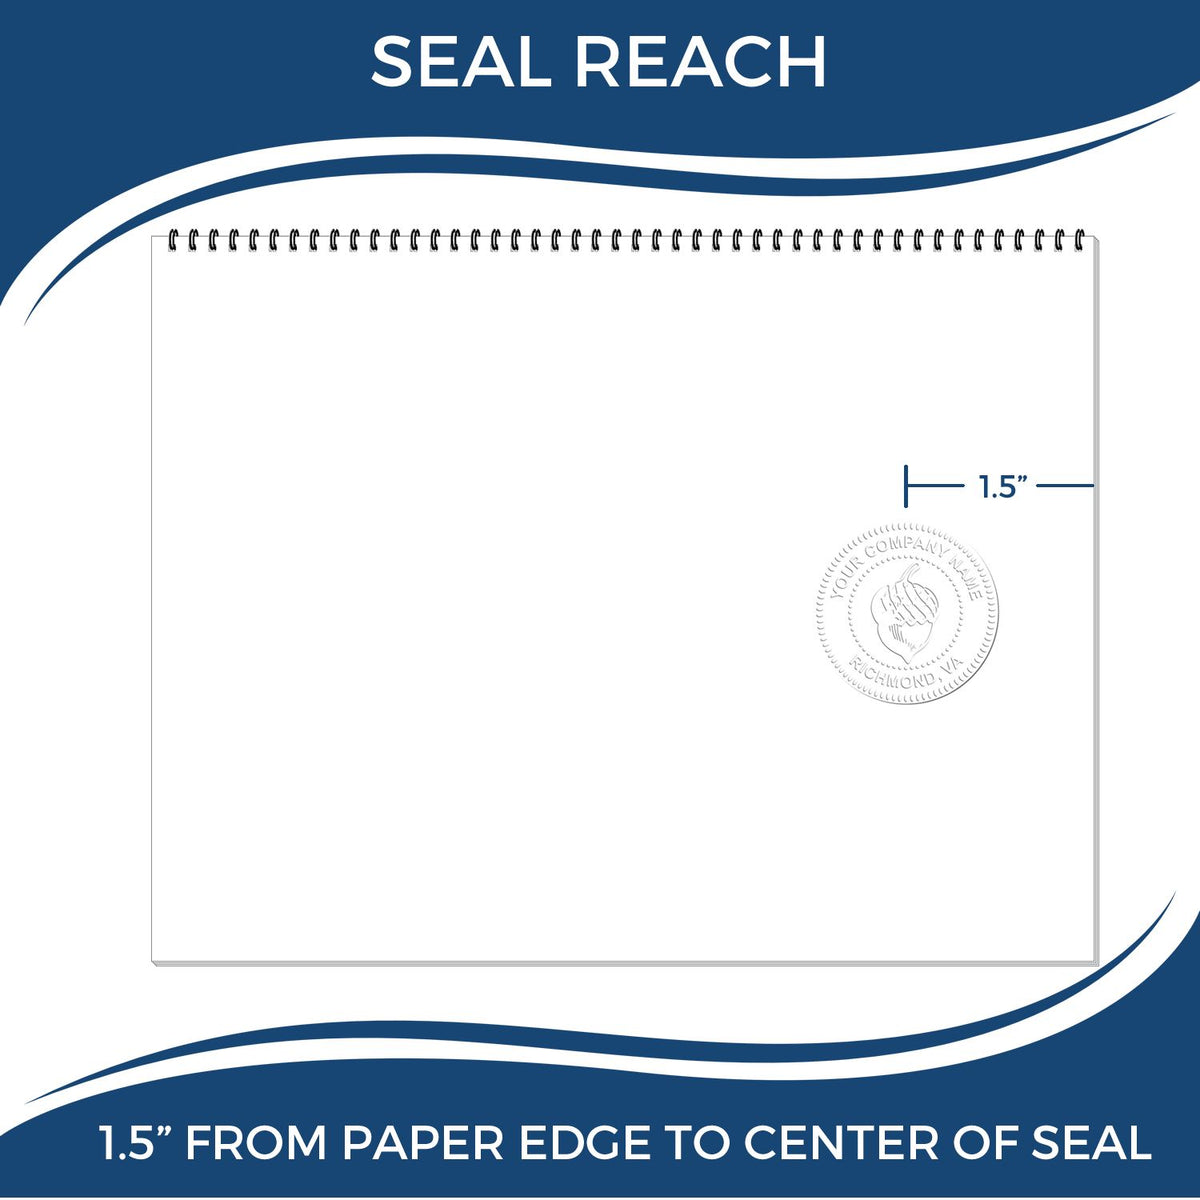 An infographic showing the seal reach which is represented by a ruler and a miniature seal image of the Soft New Mexico Professional Geologist Seal